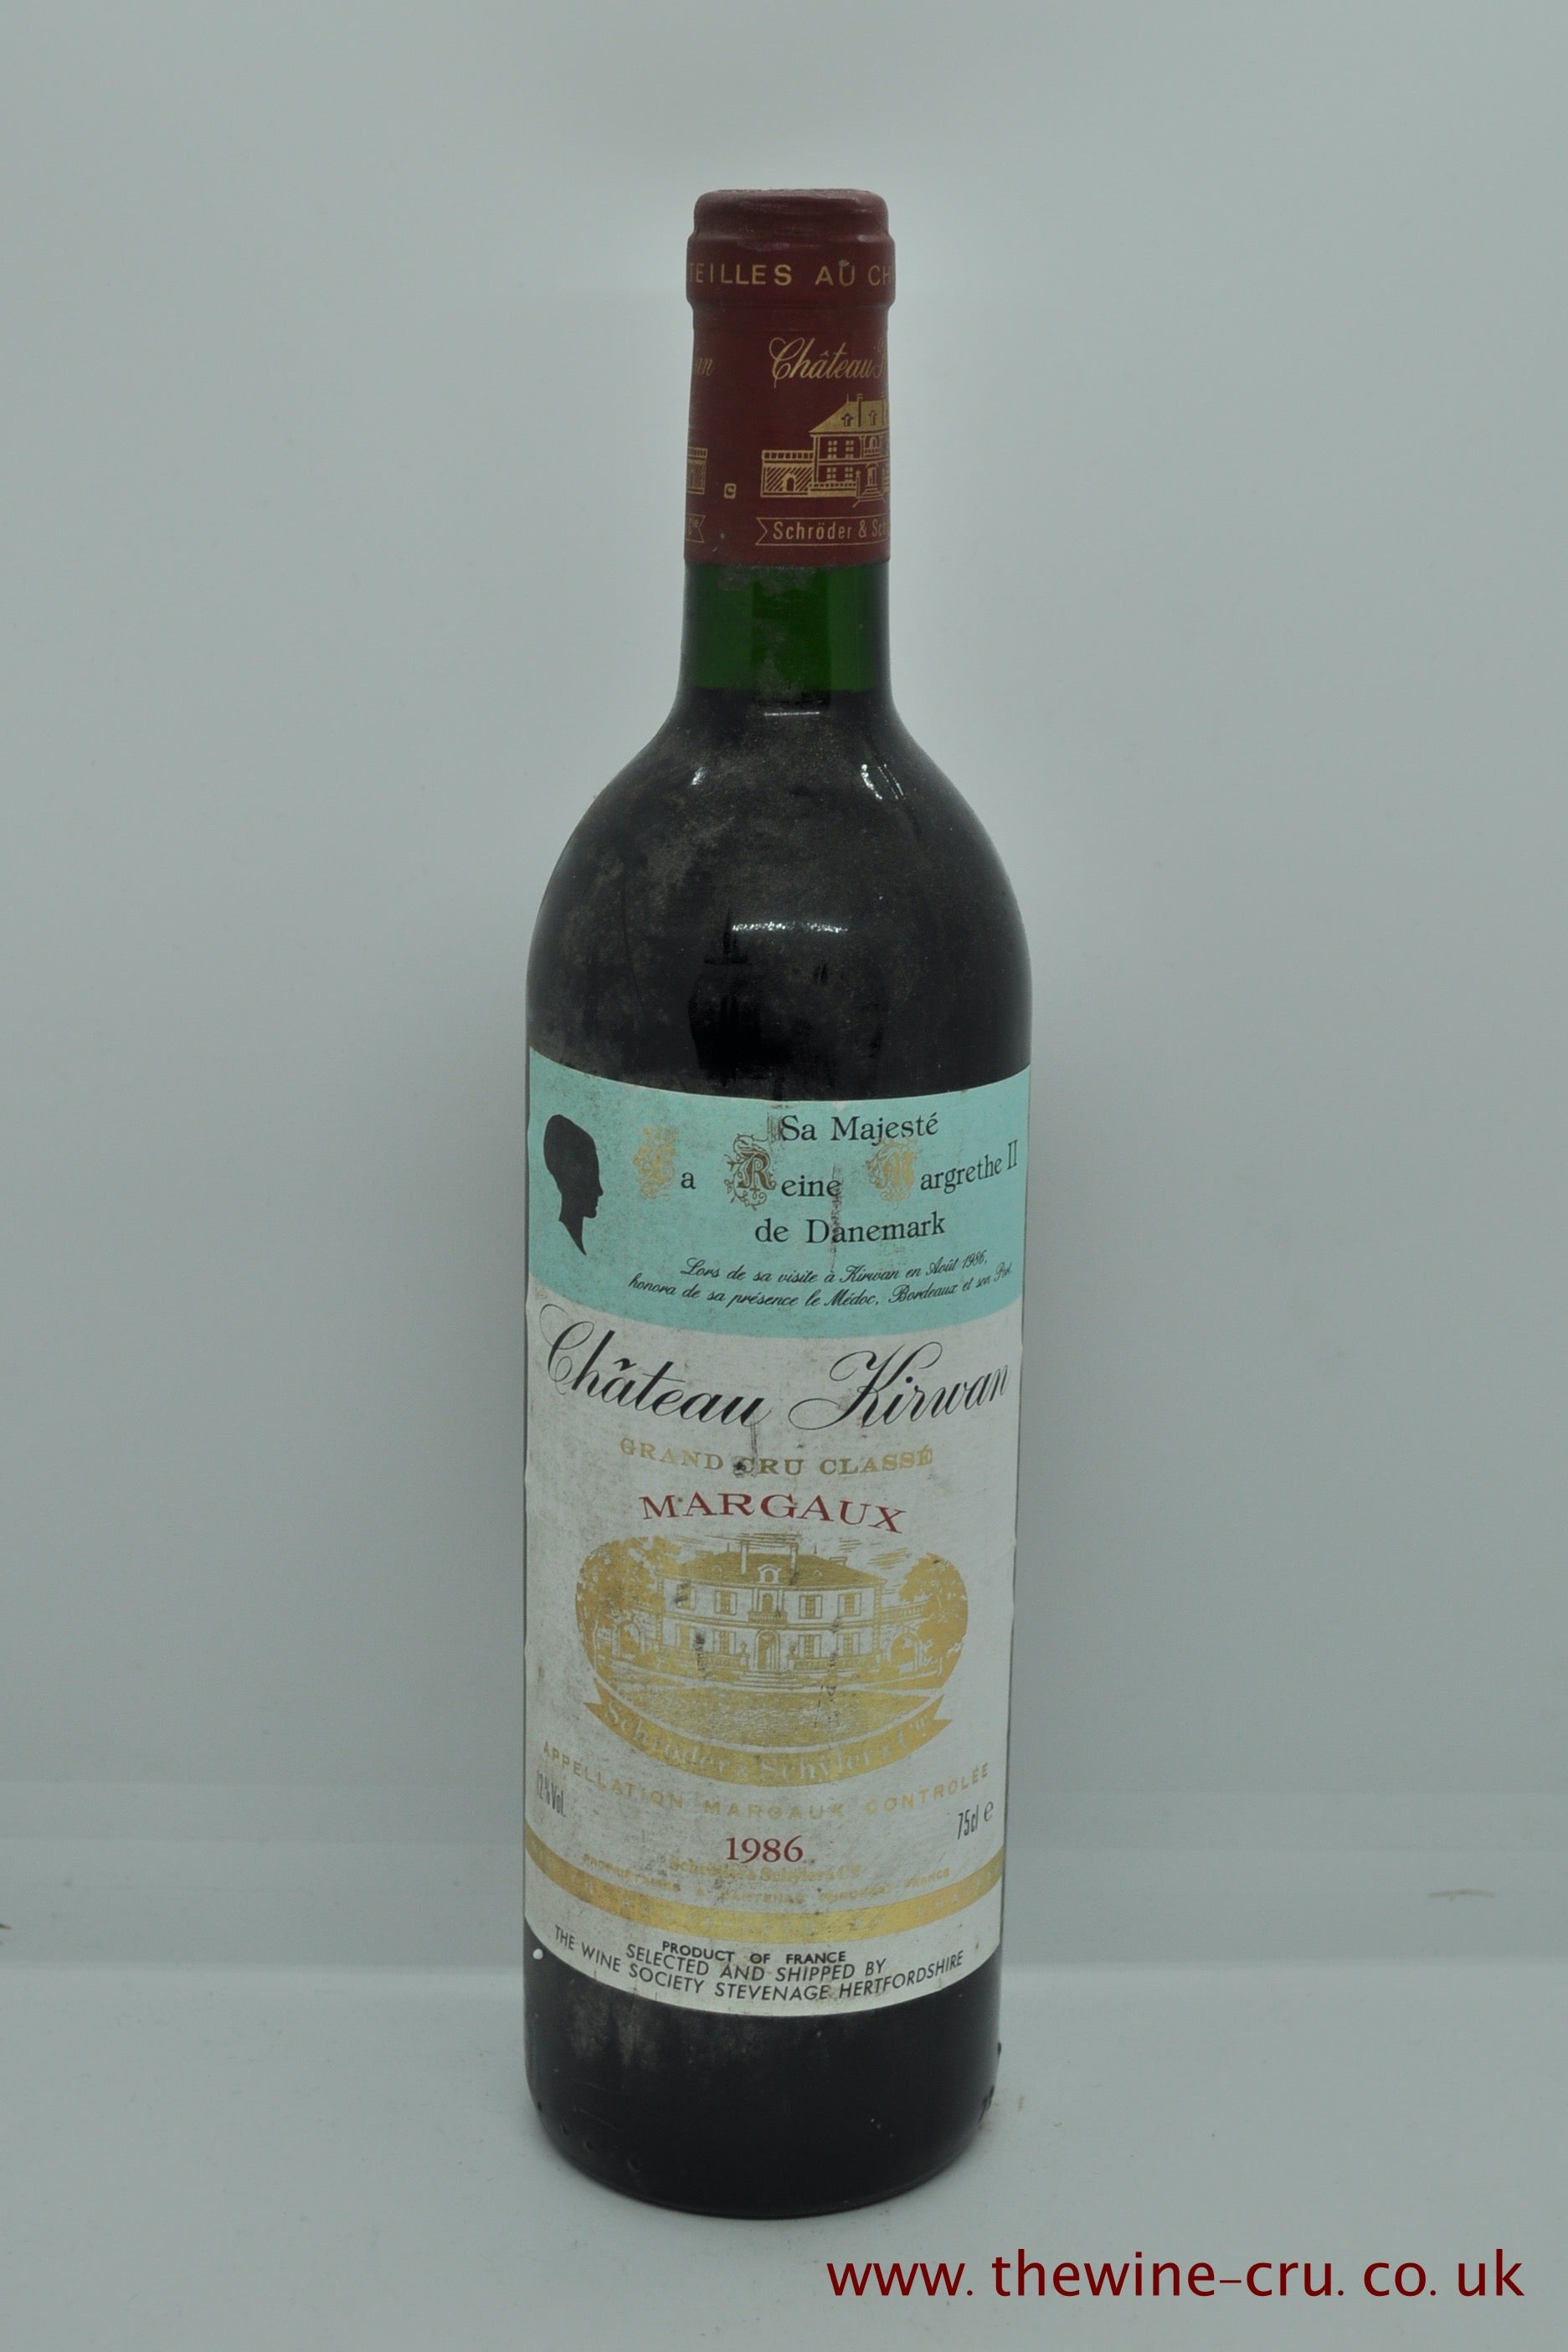 A bottle of 1986 vintage red wine. Chateau Kirwan 1986. France, Bordeaux. The bottle is in good condition with the wine level being base of neck. Immediate delivery. Free local delivery. Gift wrapping available.